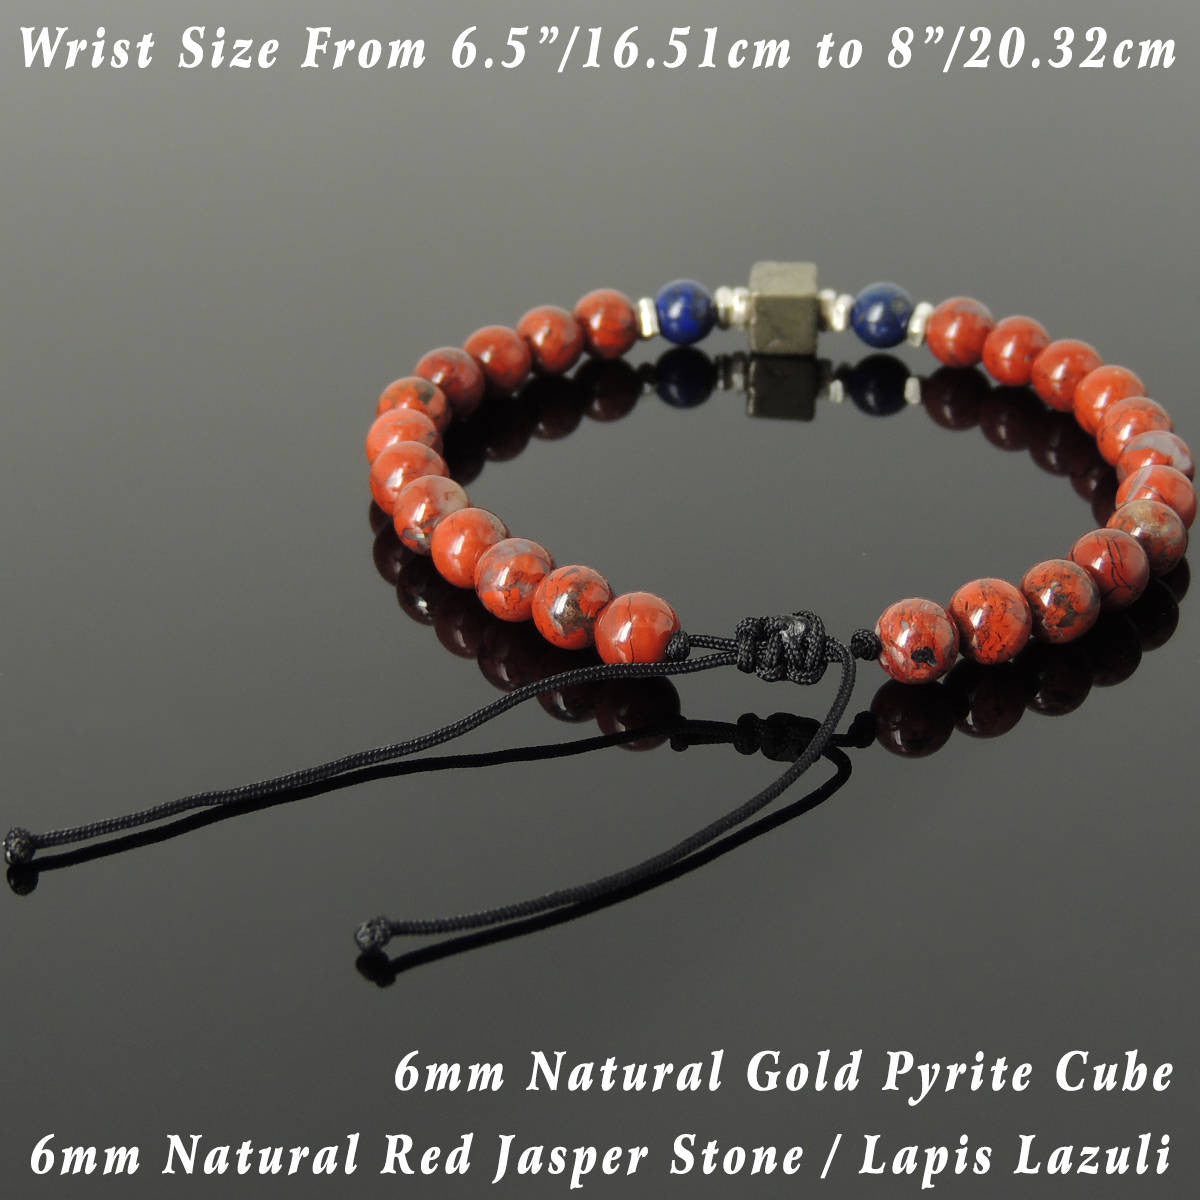 6mm Red Jasper & Lapis Lazuli with Pyrite Cube Adjustable Braided Healing Gemstone Bracelet with S925 Sterling Silver Nugget Beads - Handmade by Gem & Silver BR1112